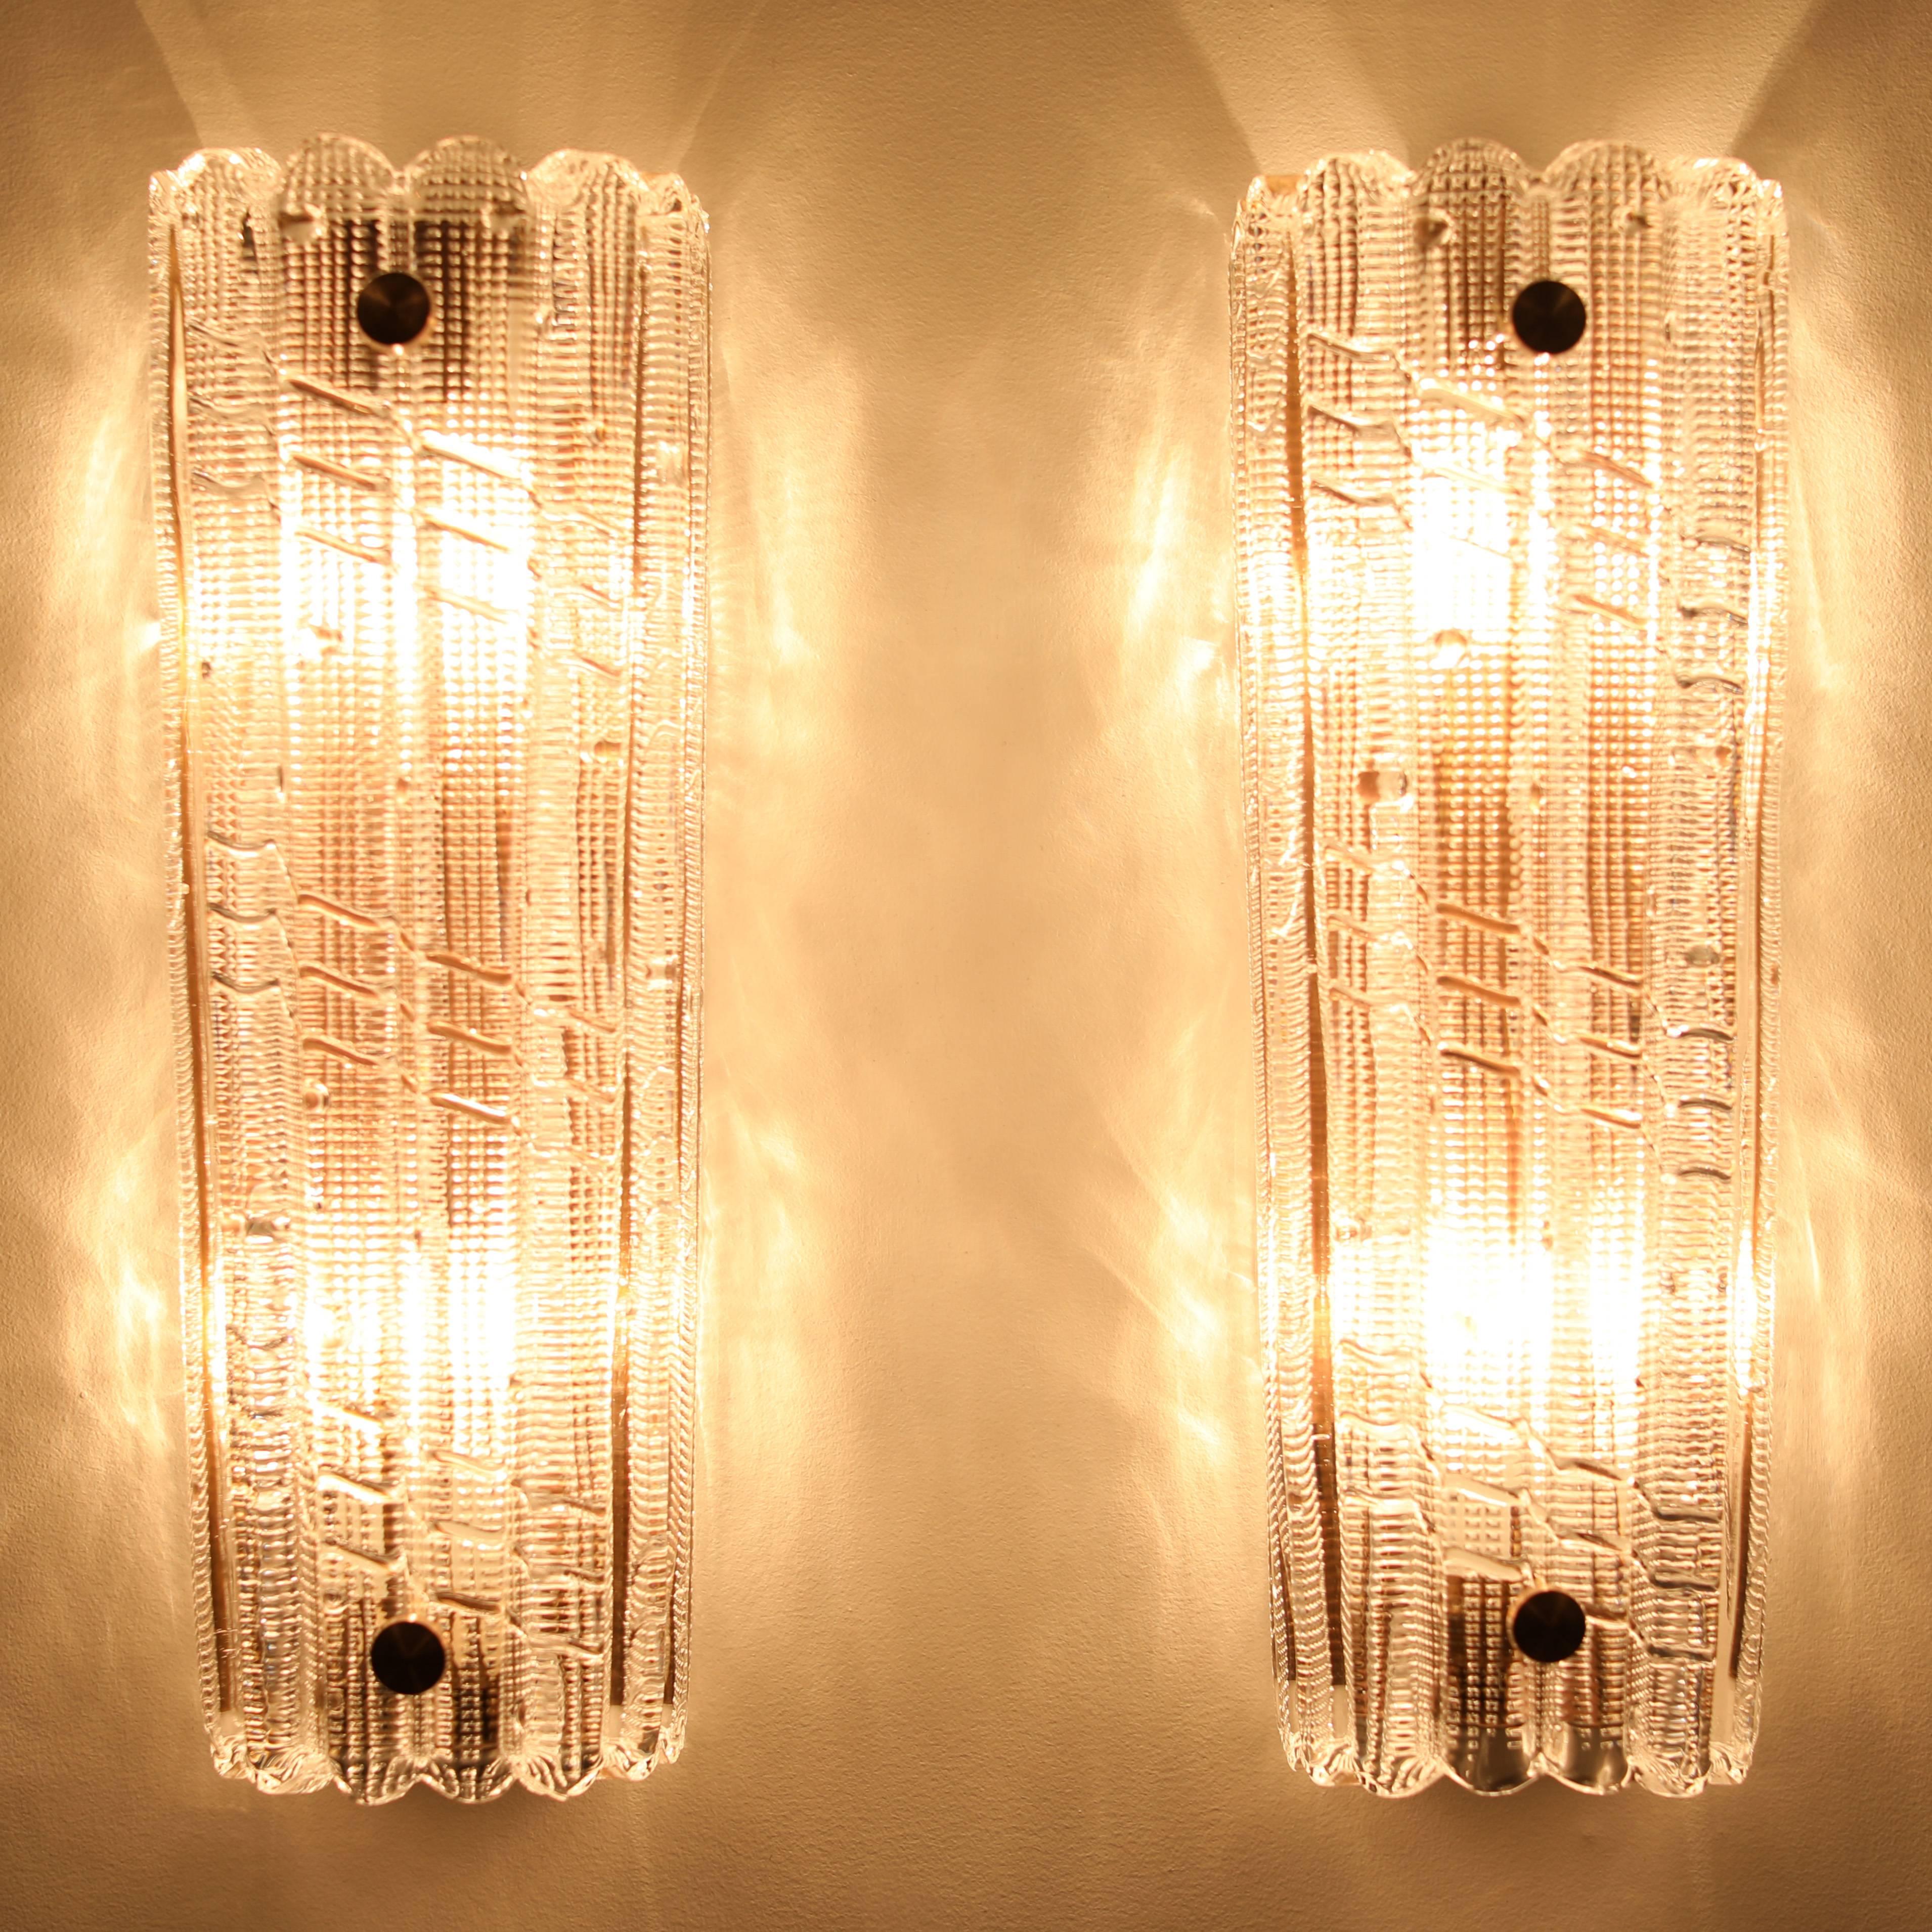 Large and stunning pair of thick mold-blown-glass sconces by Carl Fagerlund for Orrefors, Sweden, circa 1970s. The glass has cross-hatching and ribbing, producing a beautiful glow when lit. Each piece of glass tapers slightly from 5.25